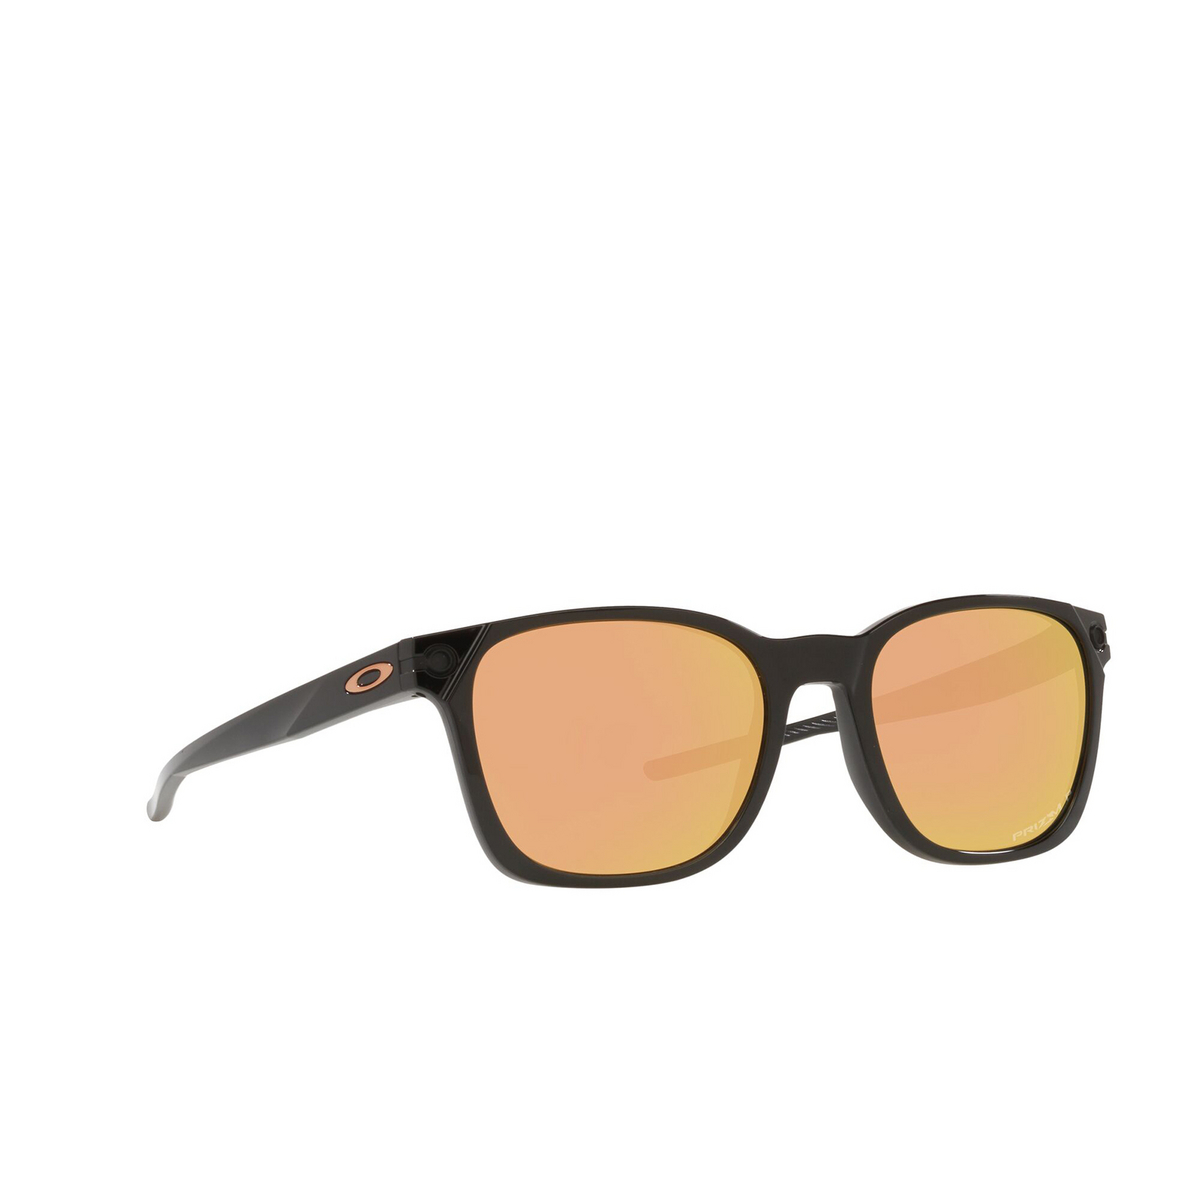 Oakley® Square Sunglasses: Ojector OO9018 color Polished Black 901806 - three-quarters view.